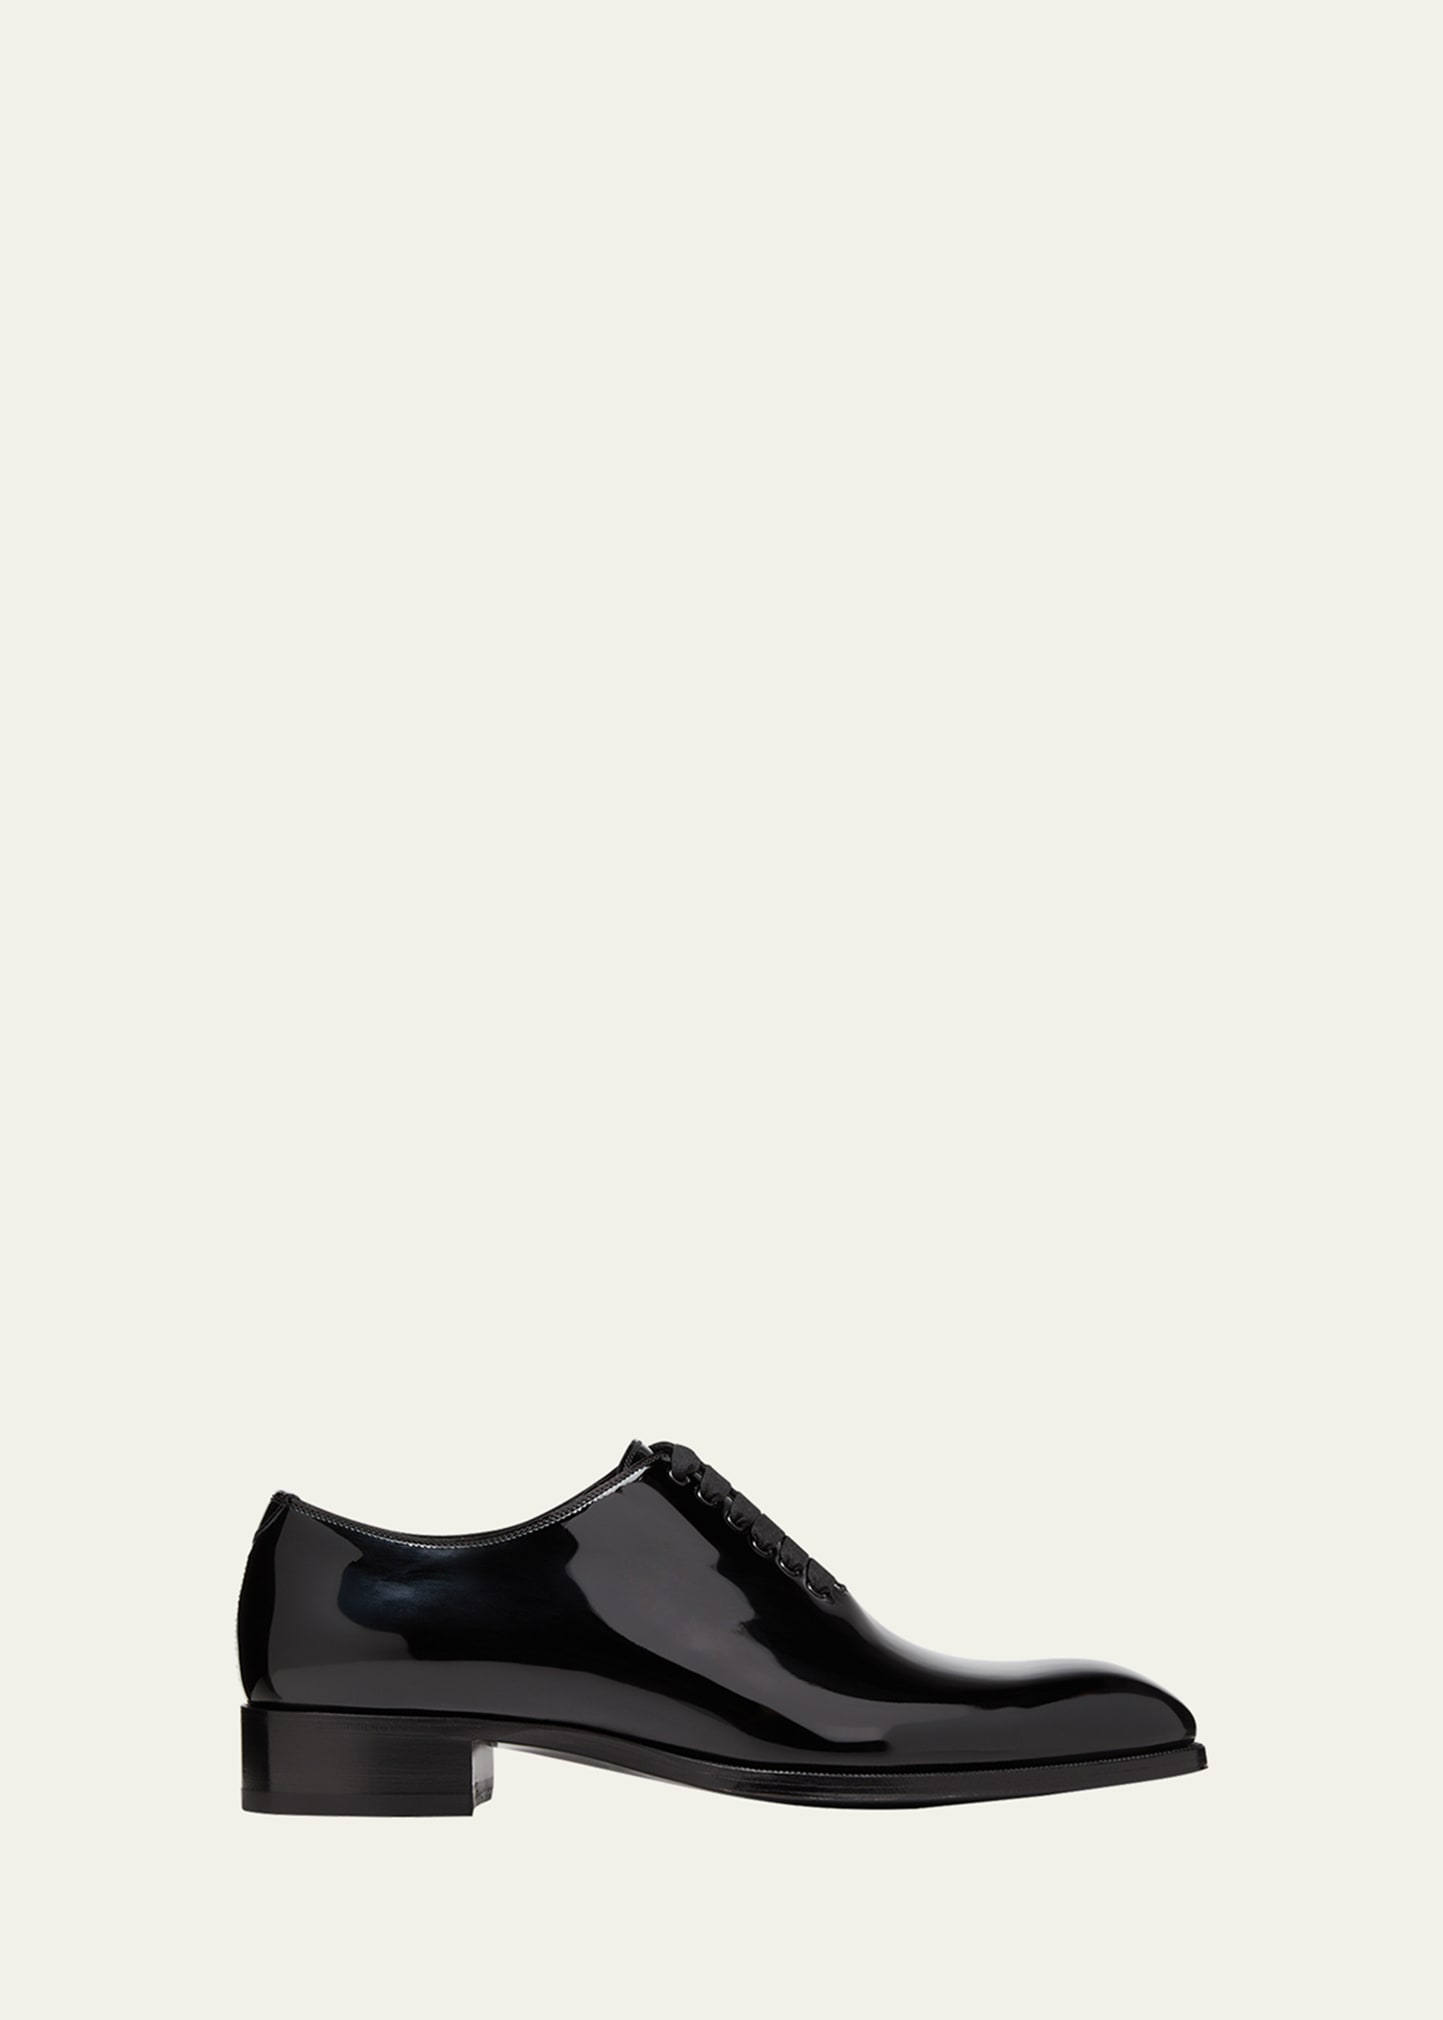 TOM FORD Men's Formal Lace-Up Leather Loafers | Bergdorf Goodman